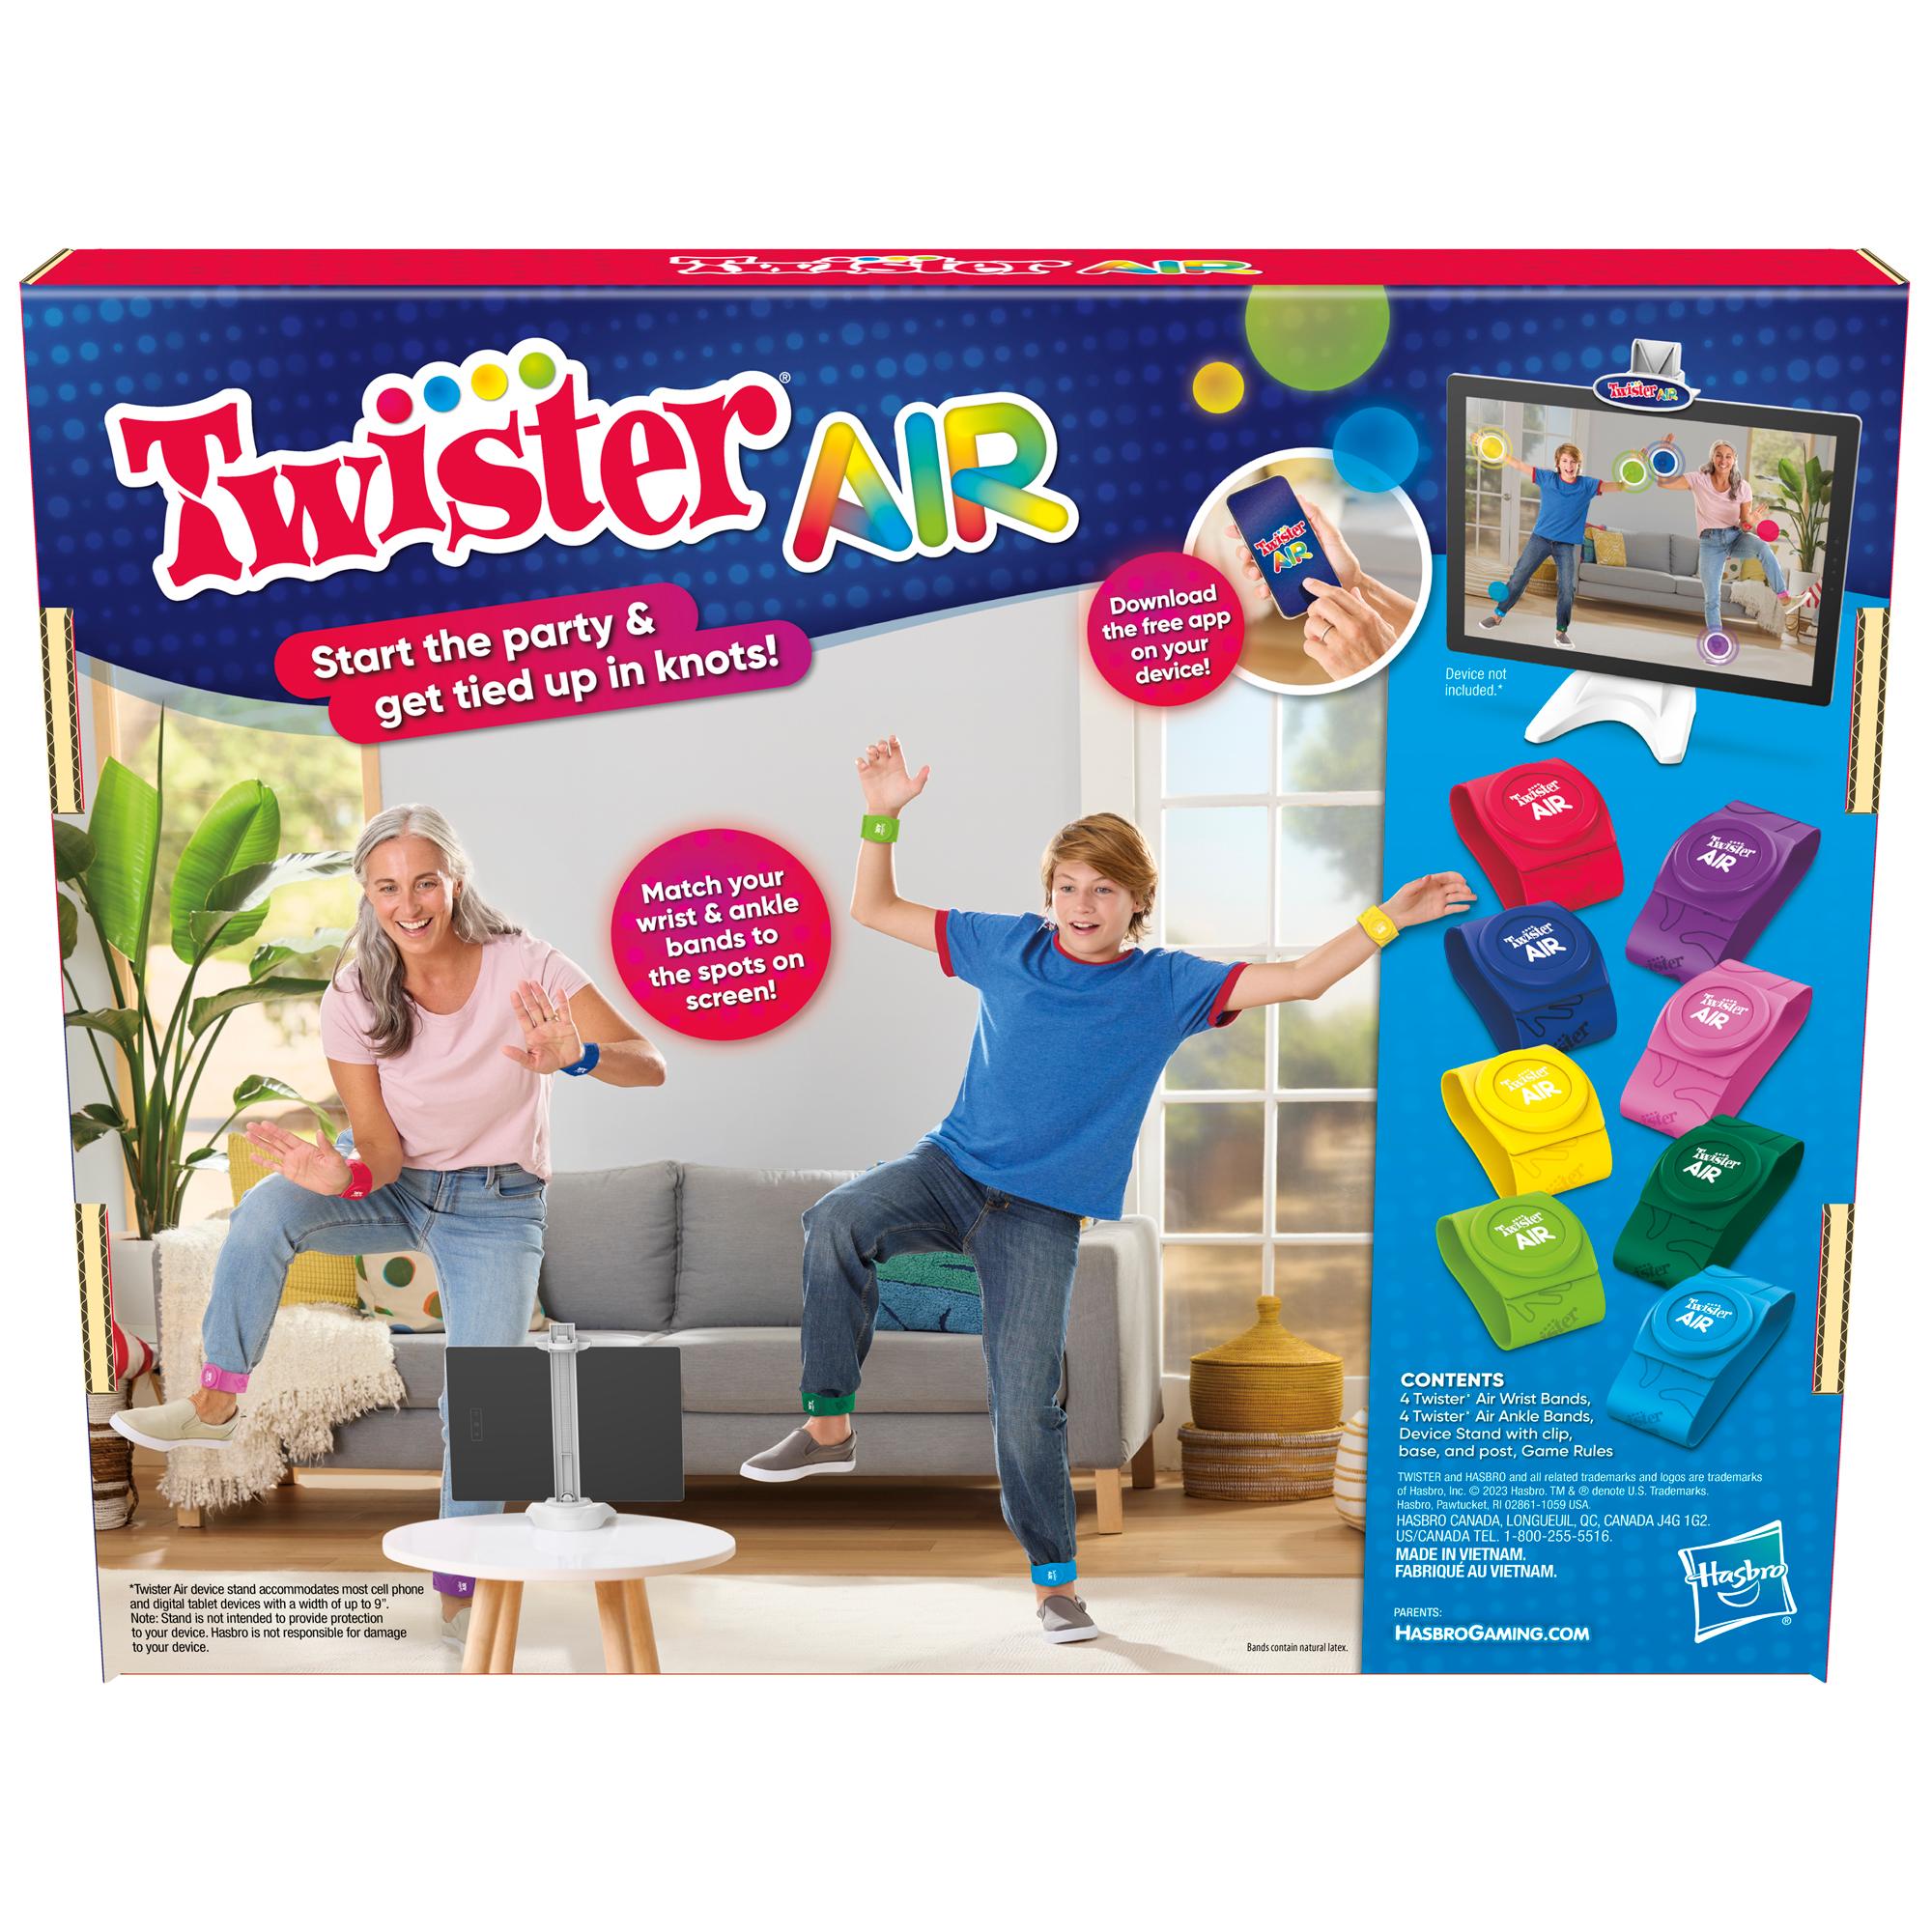 Hasbro Announces Spin on Classic Twister With New Augmented Reality Twister  Air Game… No Mat Required